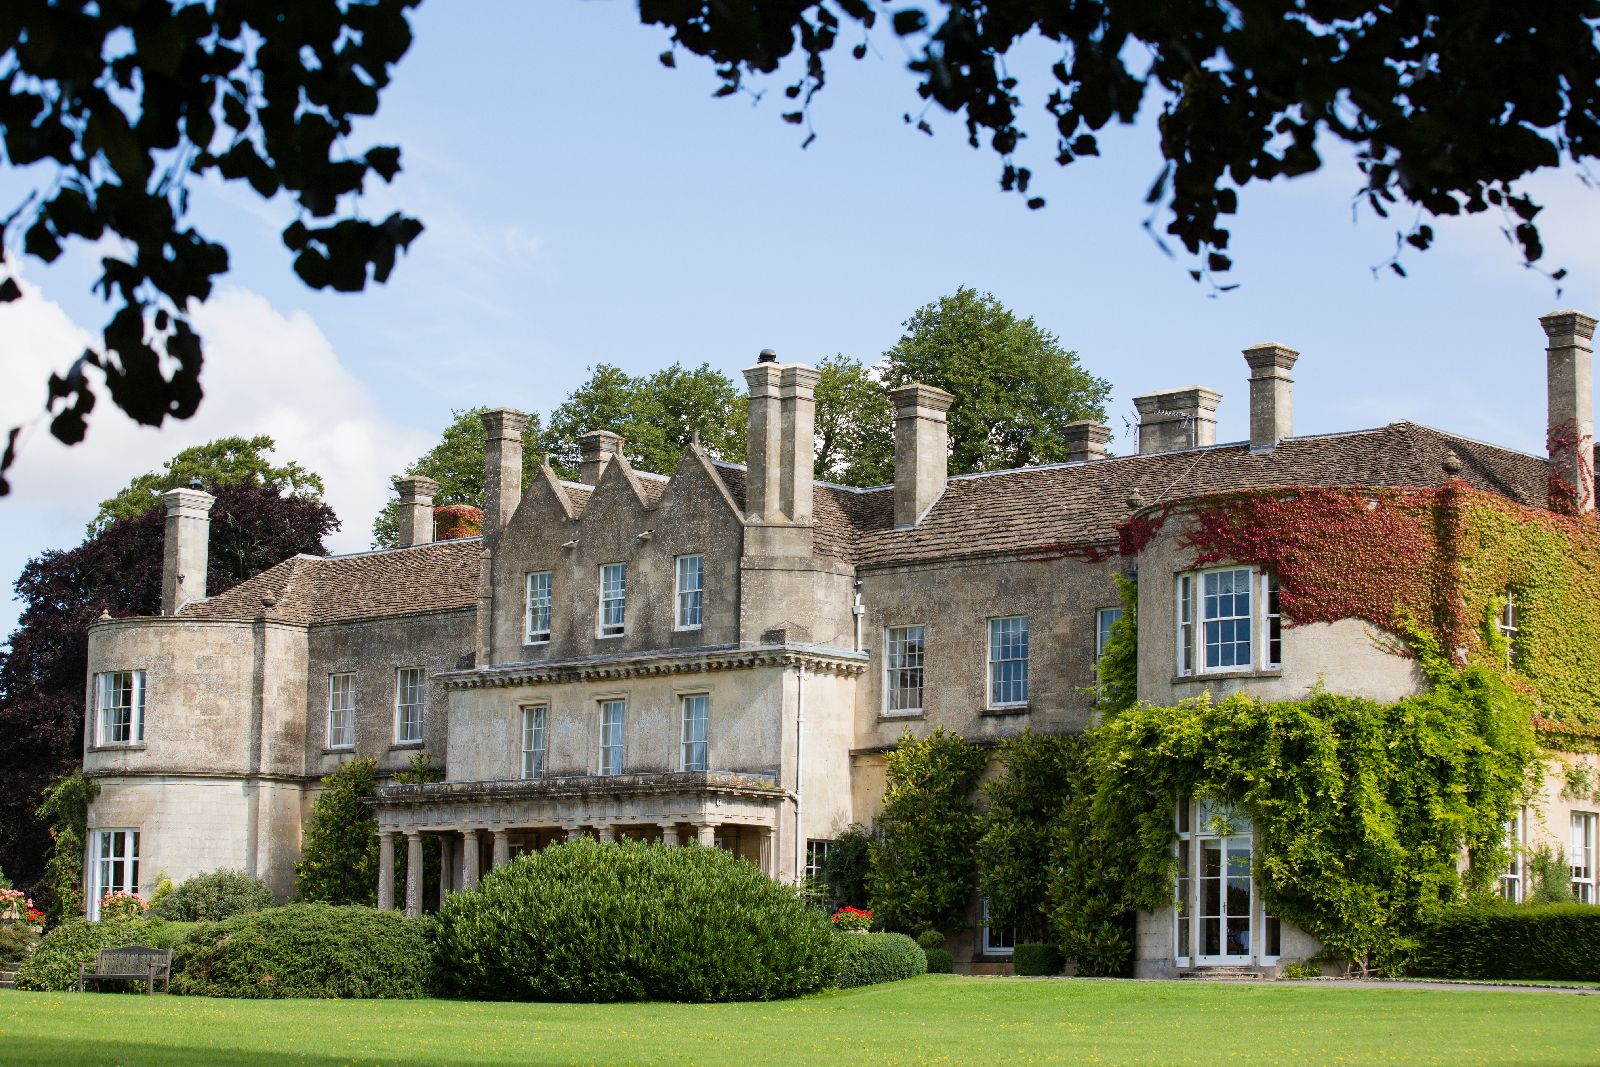 Exterior and grounds of Lucknam Park hotel in the Cotswolds England